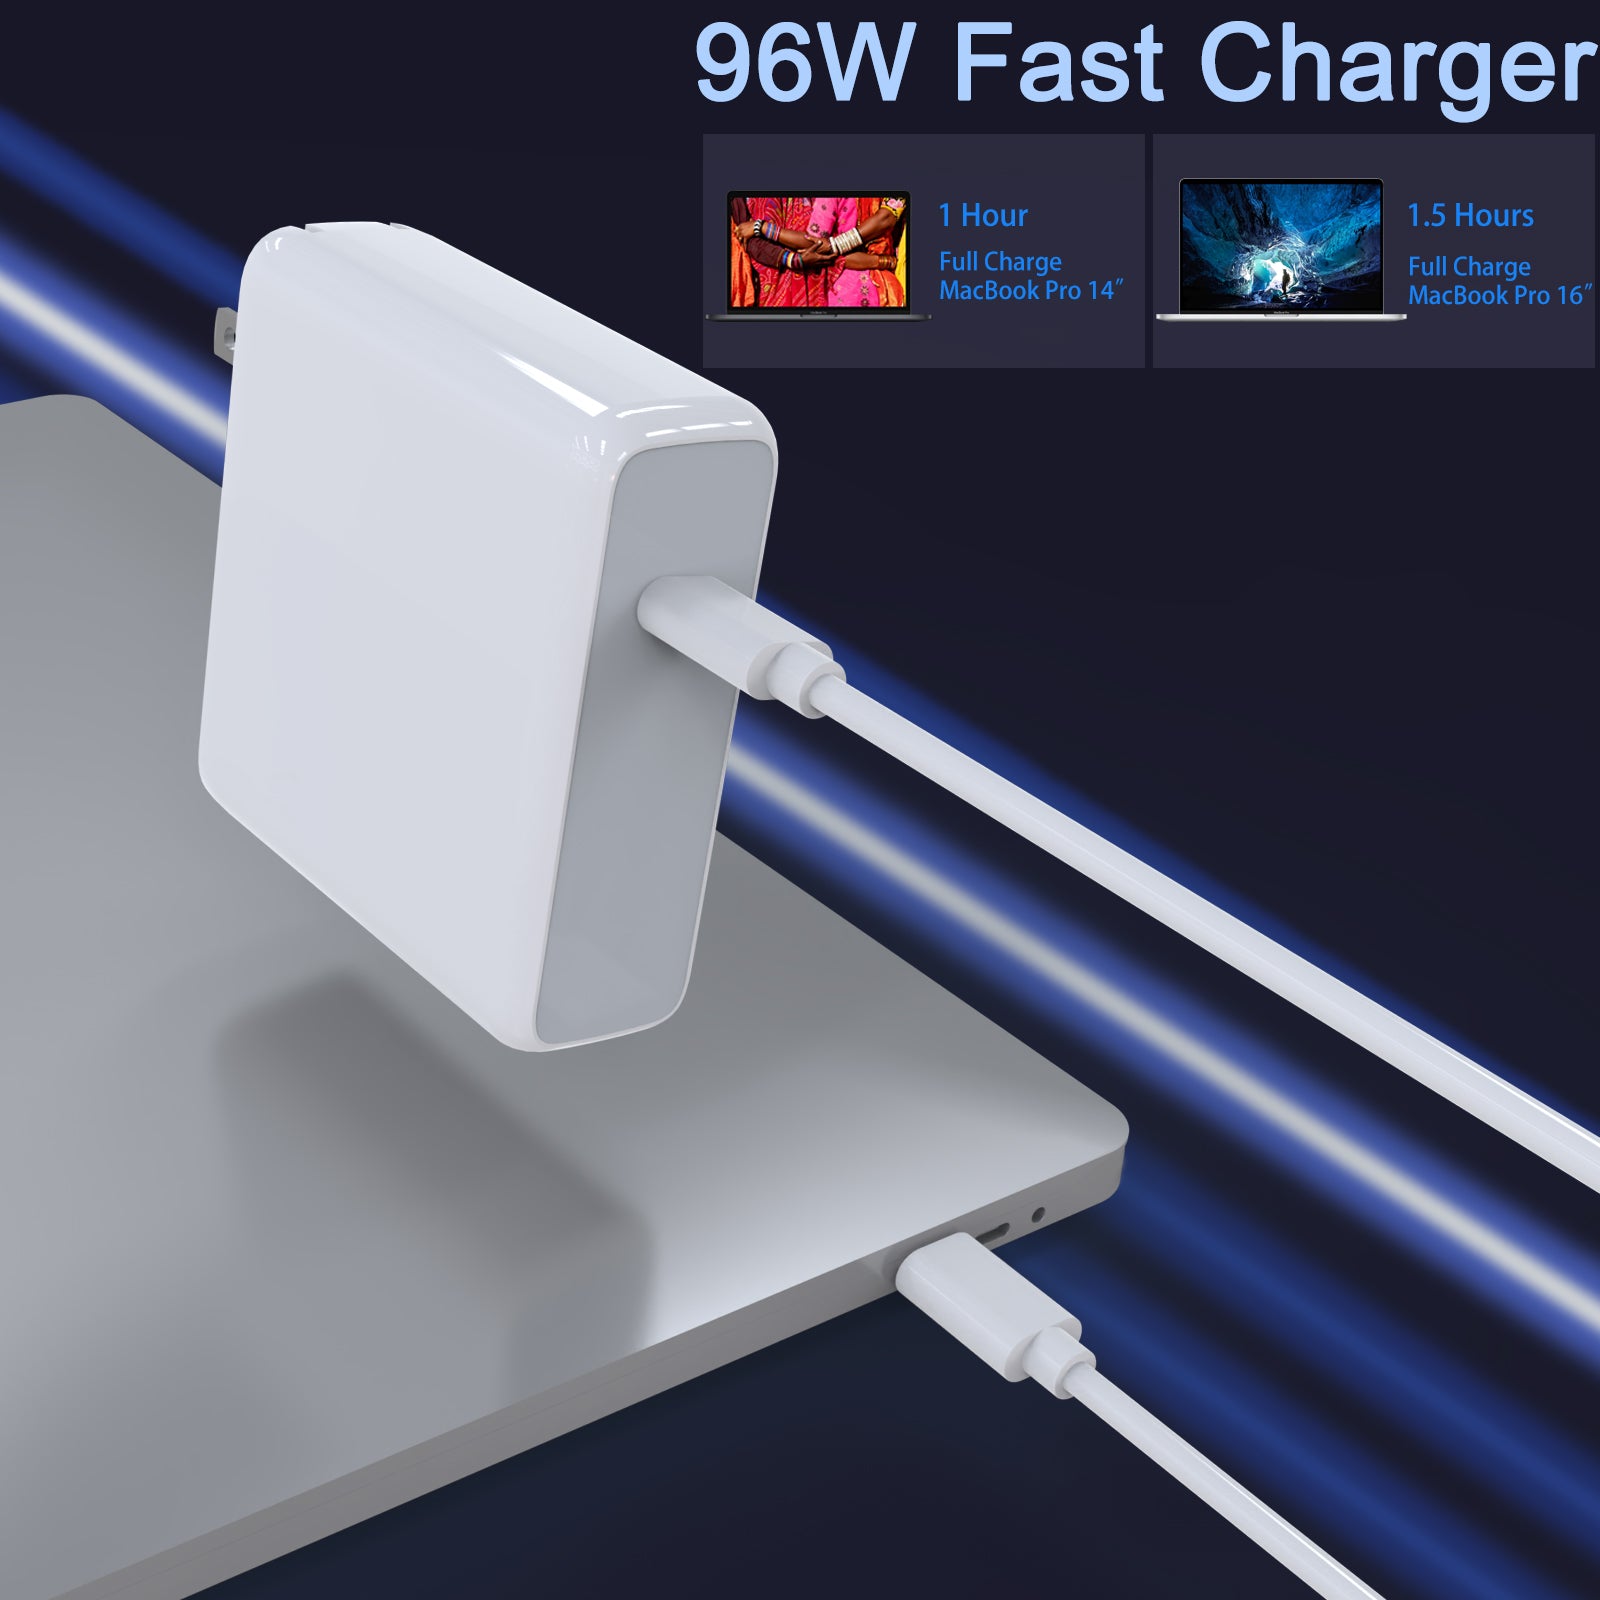 macbook pro charger usb ccharger for macbook pro